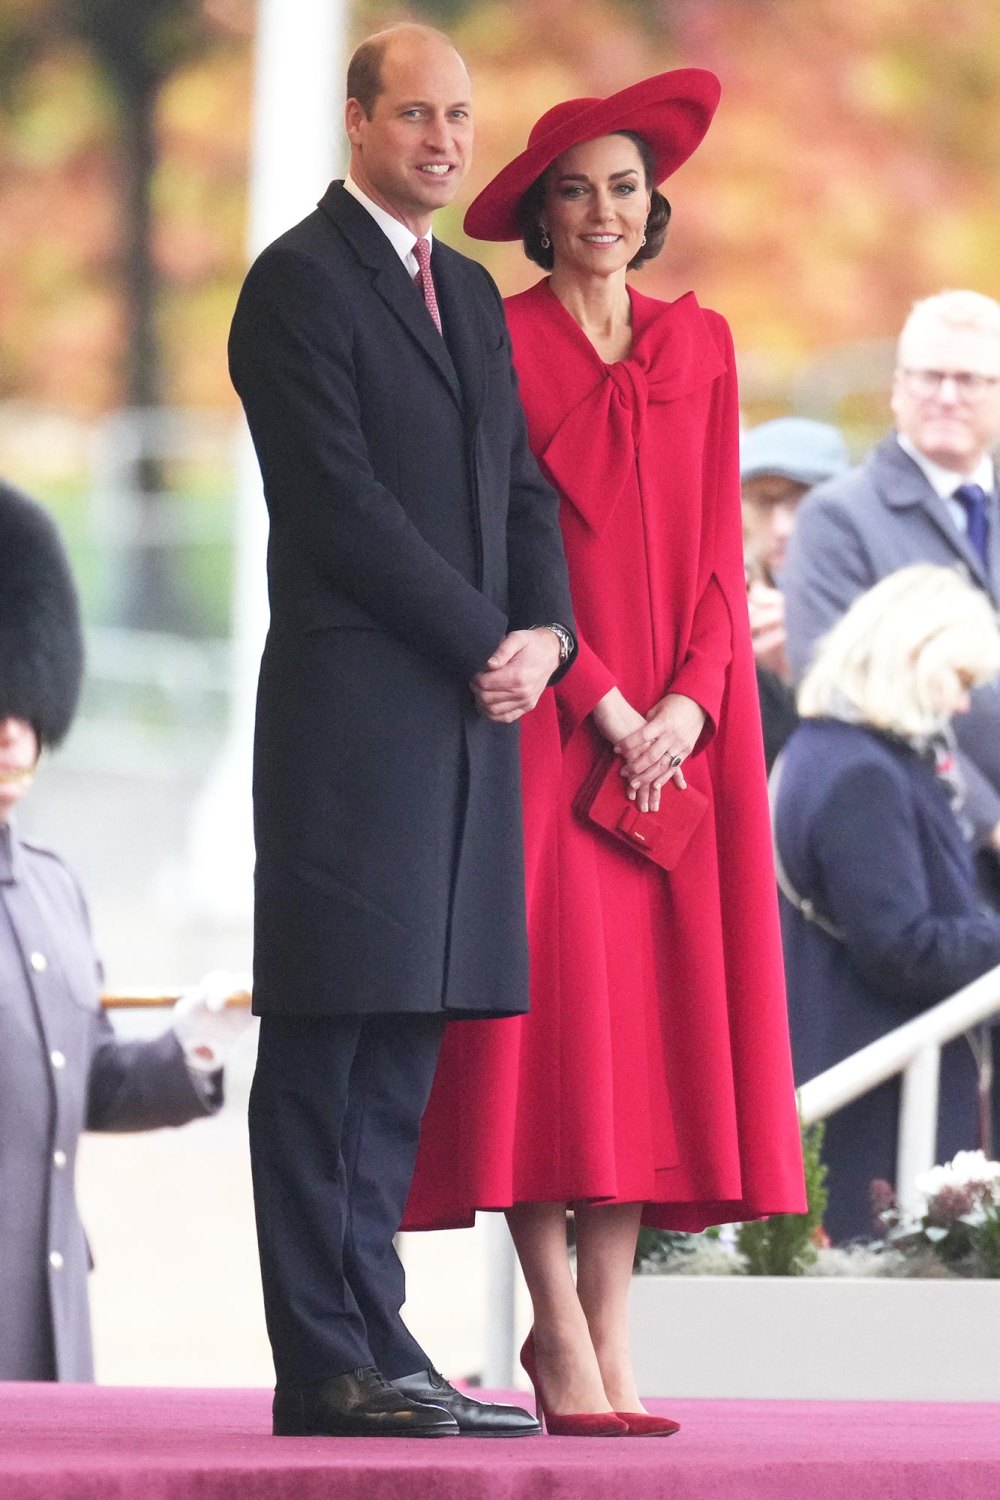 Kate Middleton Gives Quick Curtsy to King Charles III